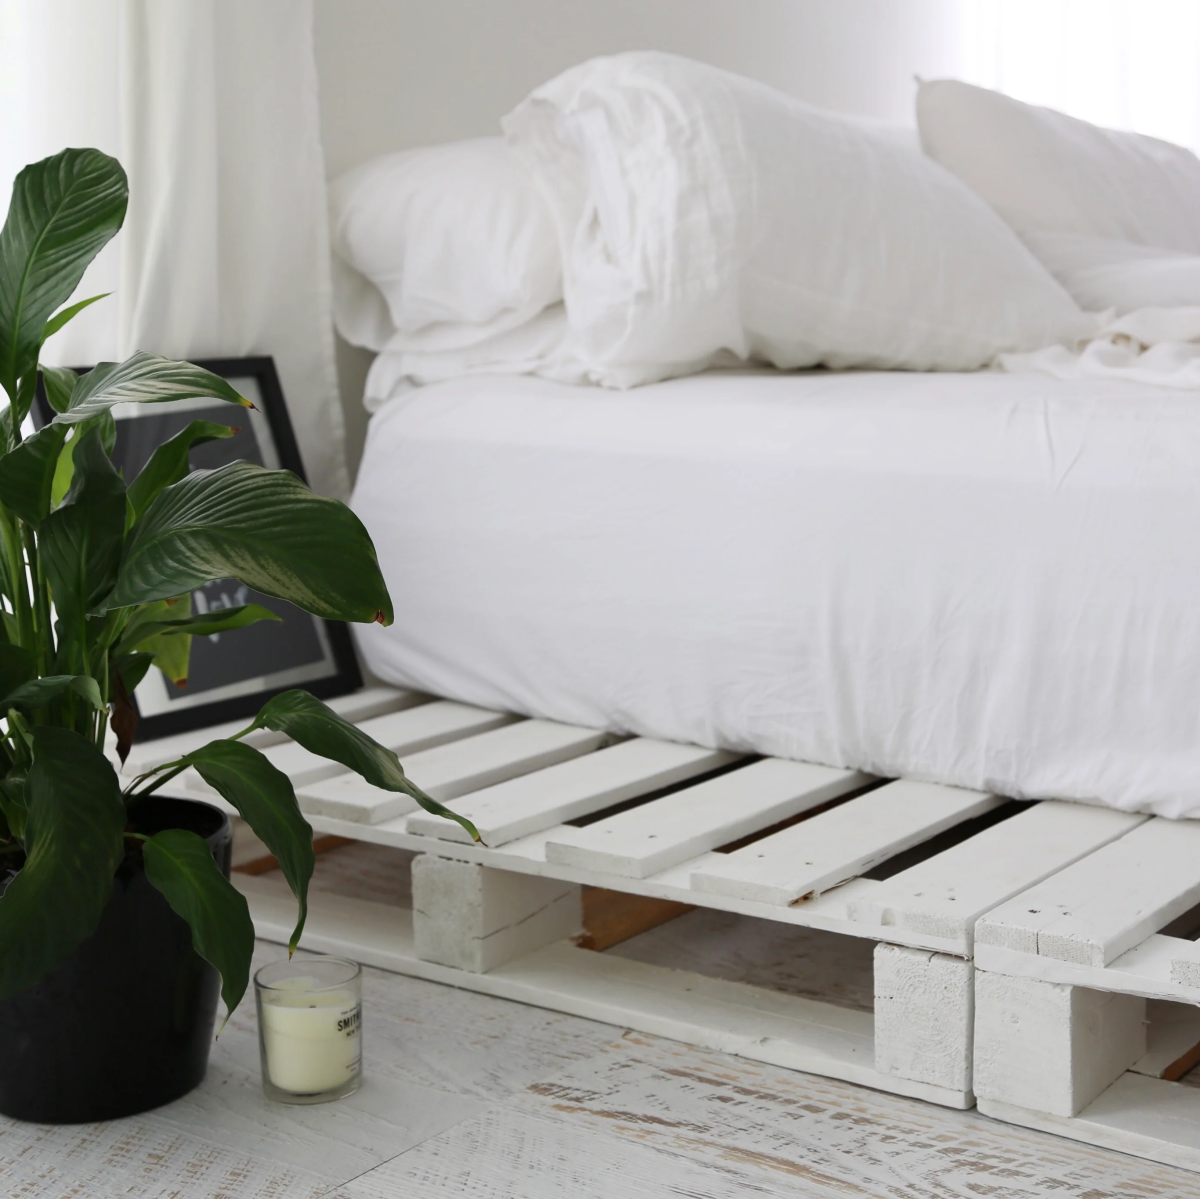 bed frame made from pallets.jpg